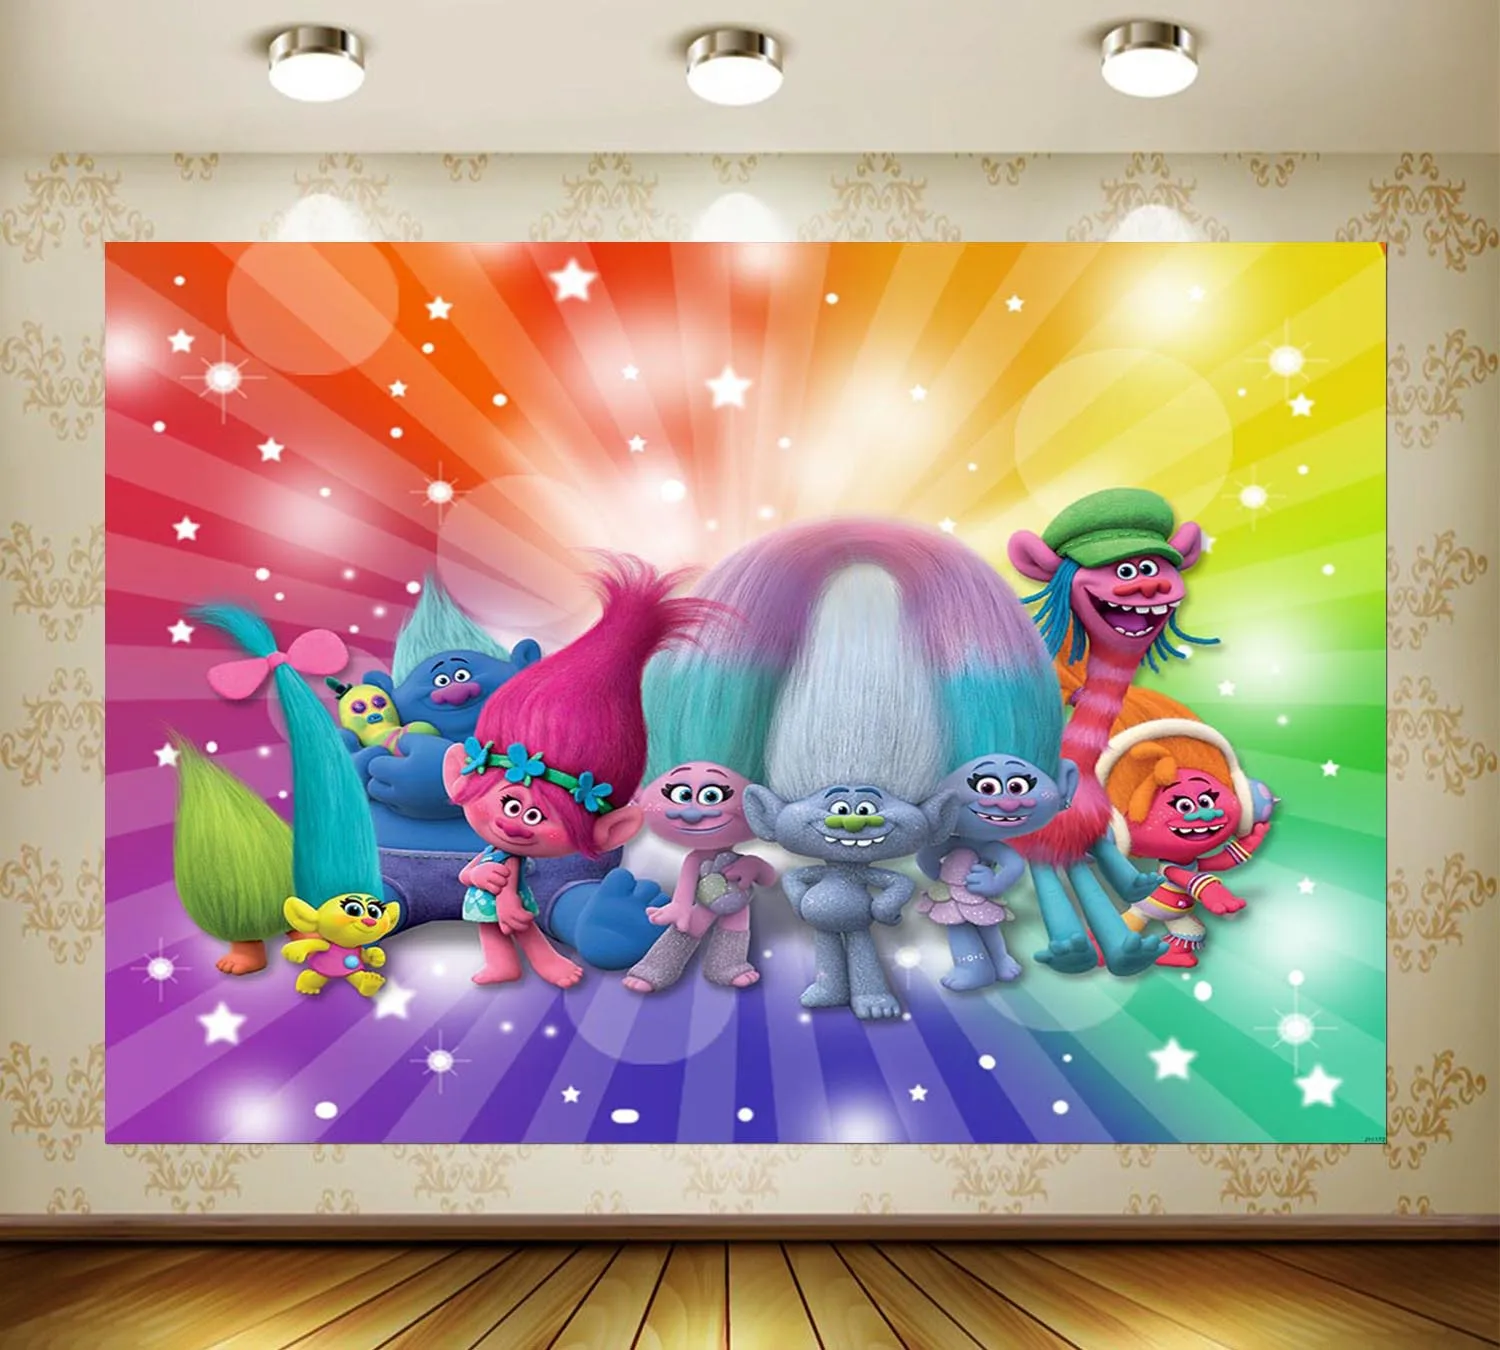 Trolls Background Party Supplies Child Faovr Elves family Birthday Table Decoration Photography Photo Backdrop Kids Vinyl Banner